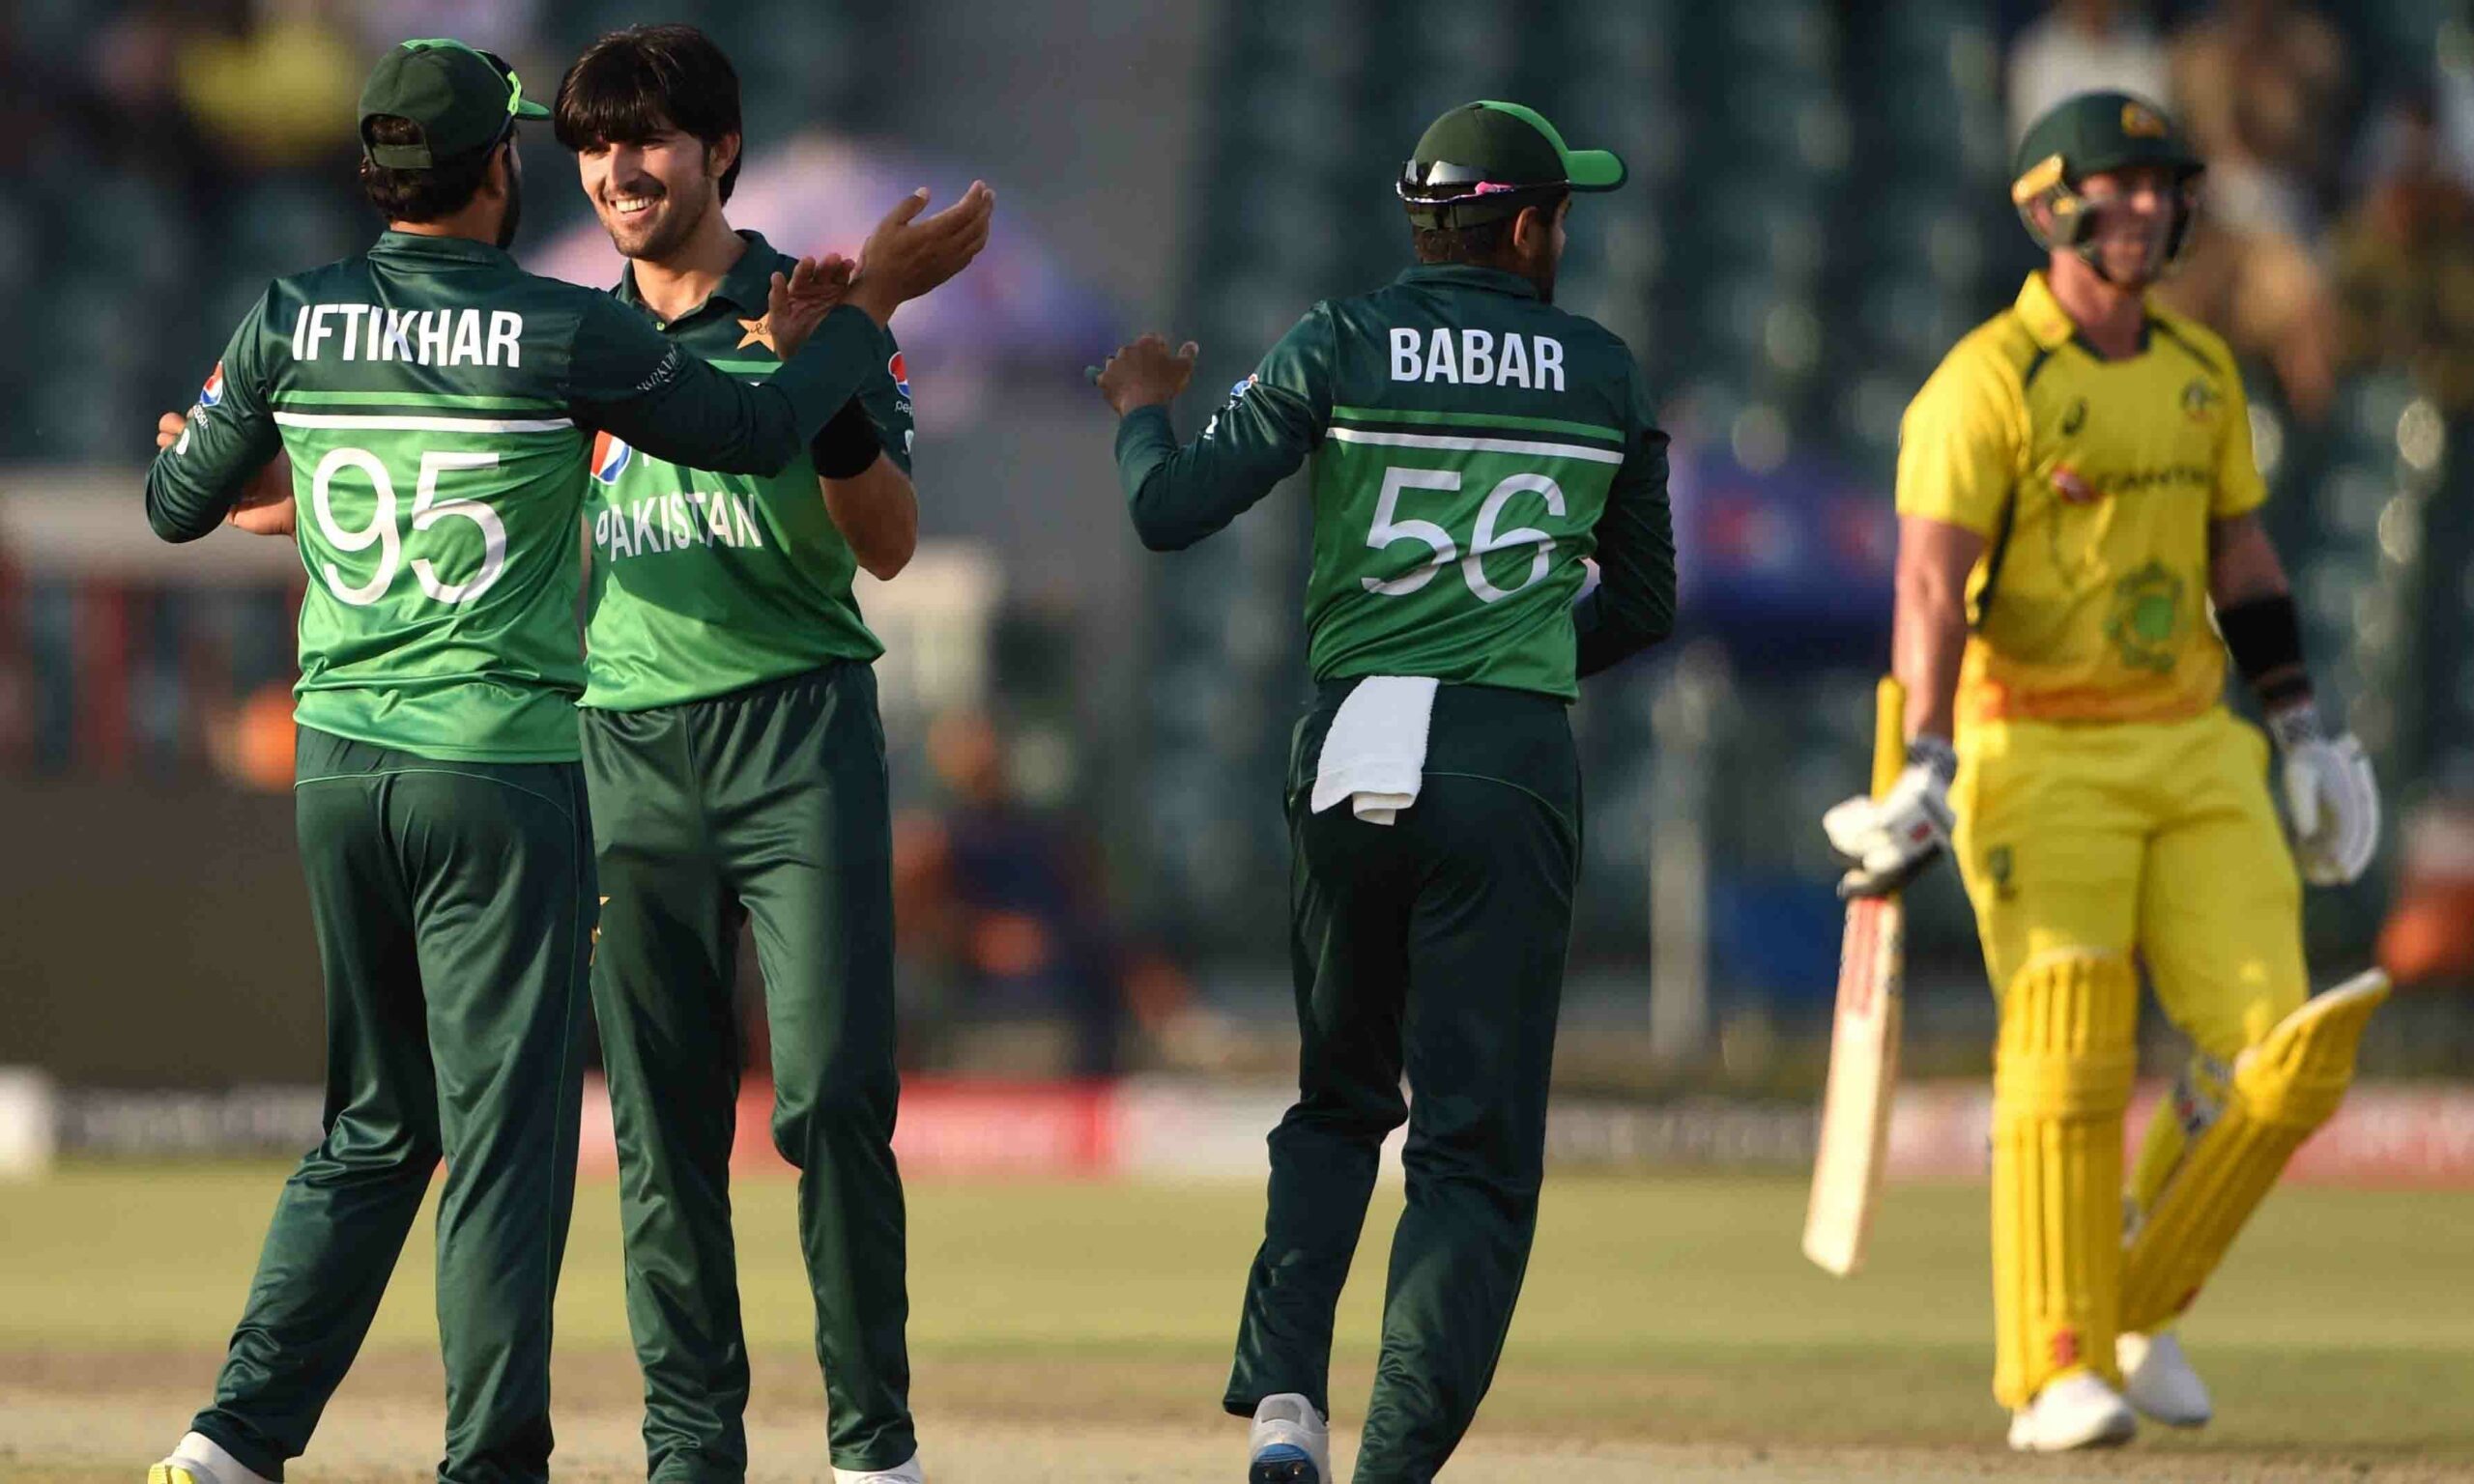 Pakistan finally showed their class against Australia in the 2nd ODI